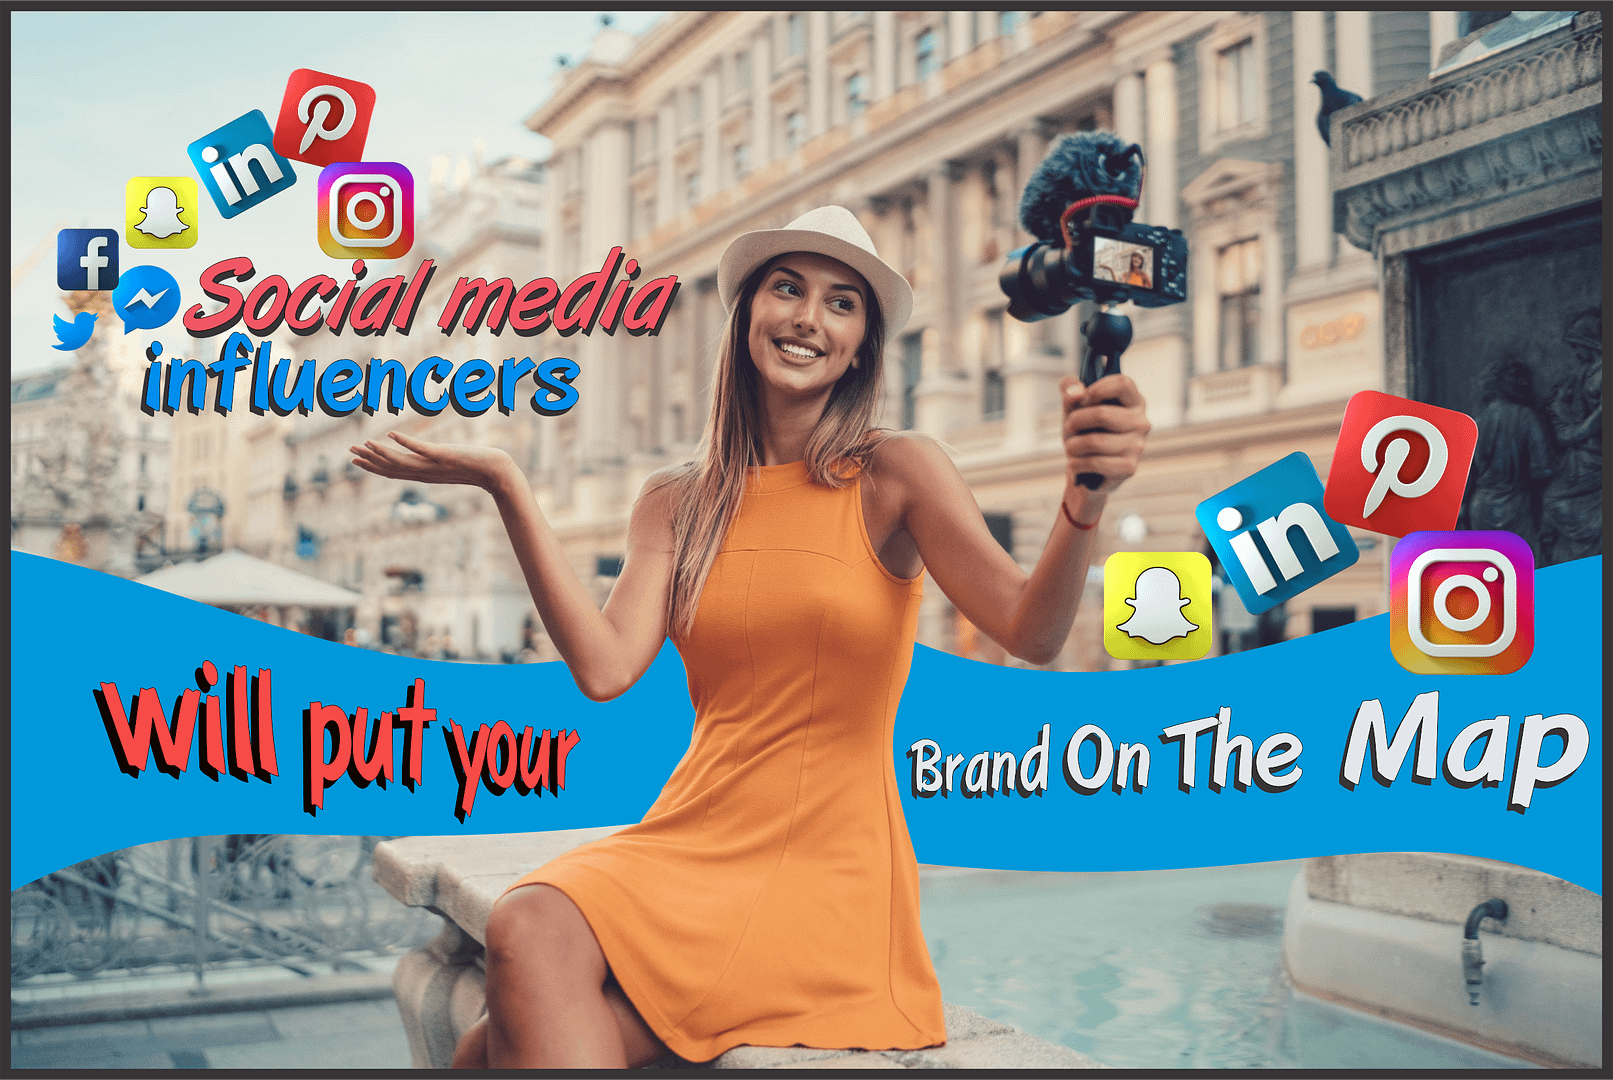 Social media influencers will put your brand on the map